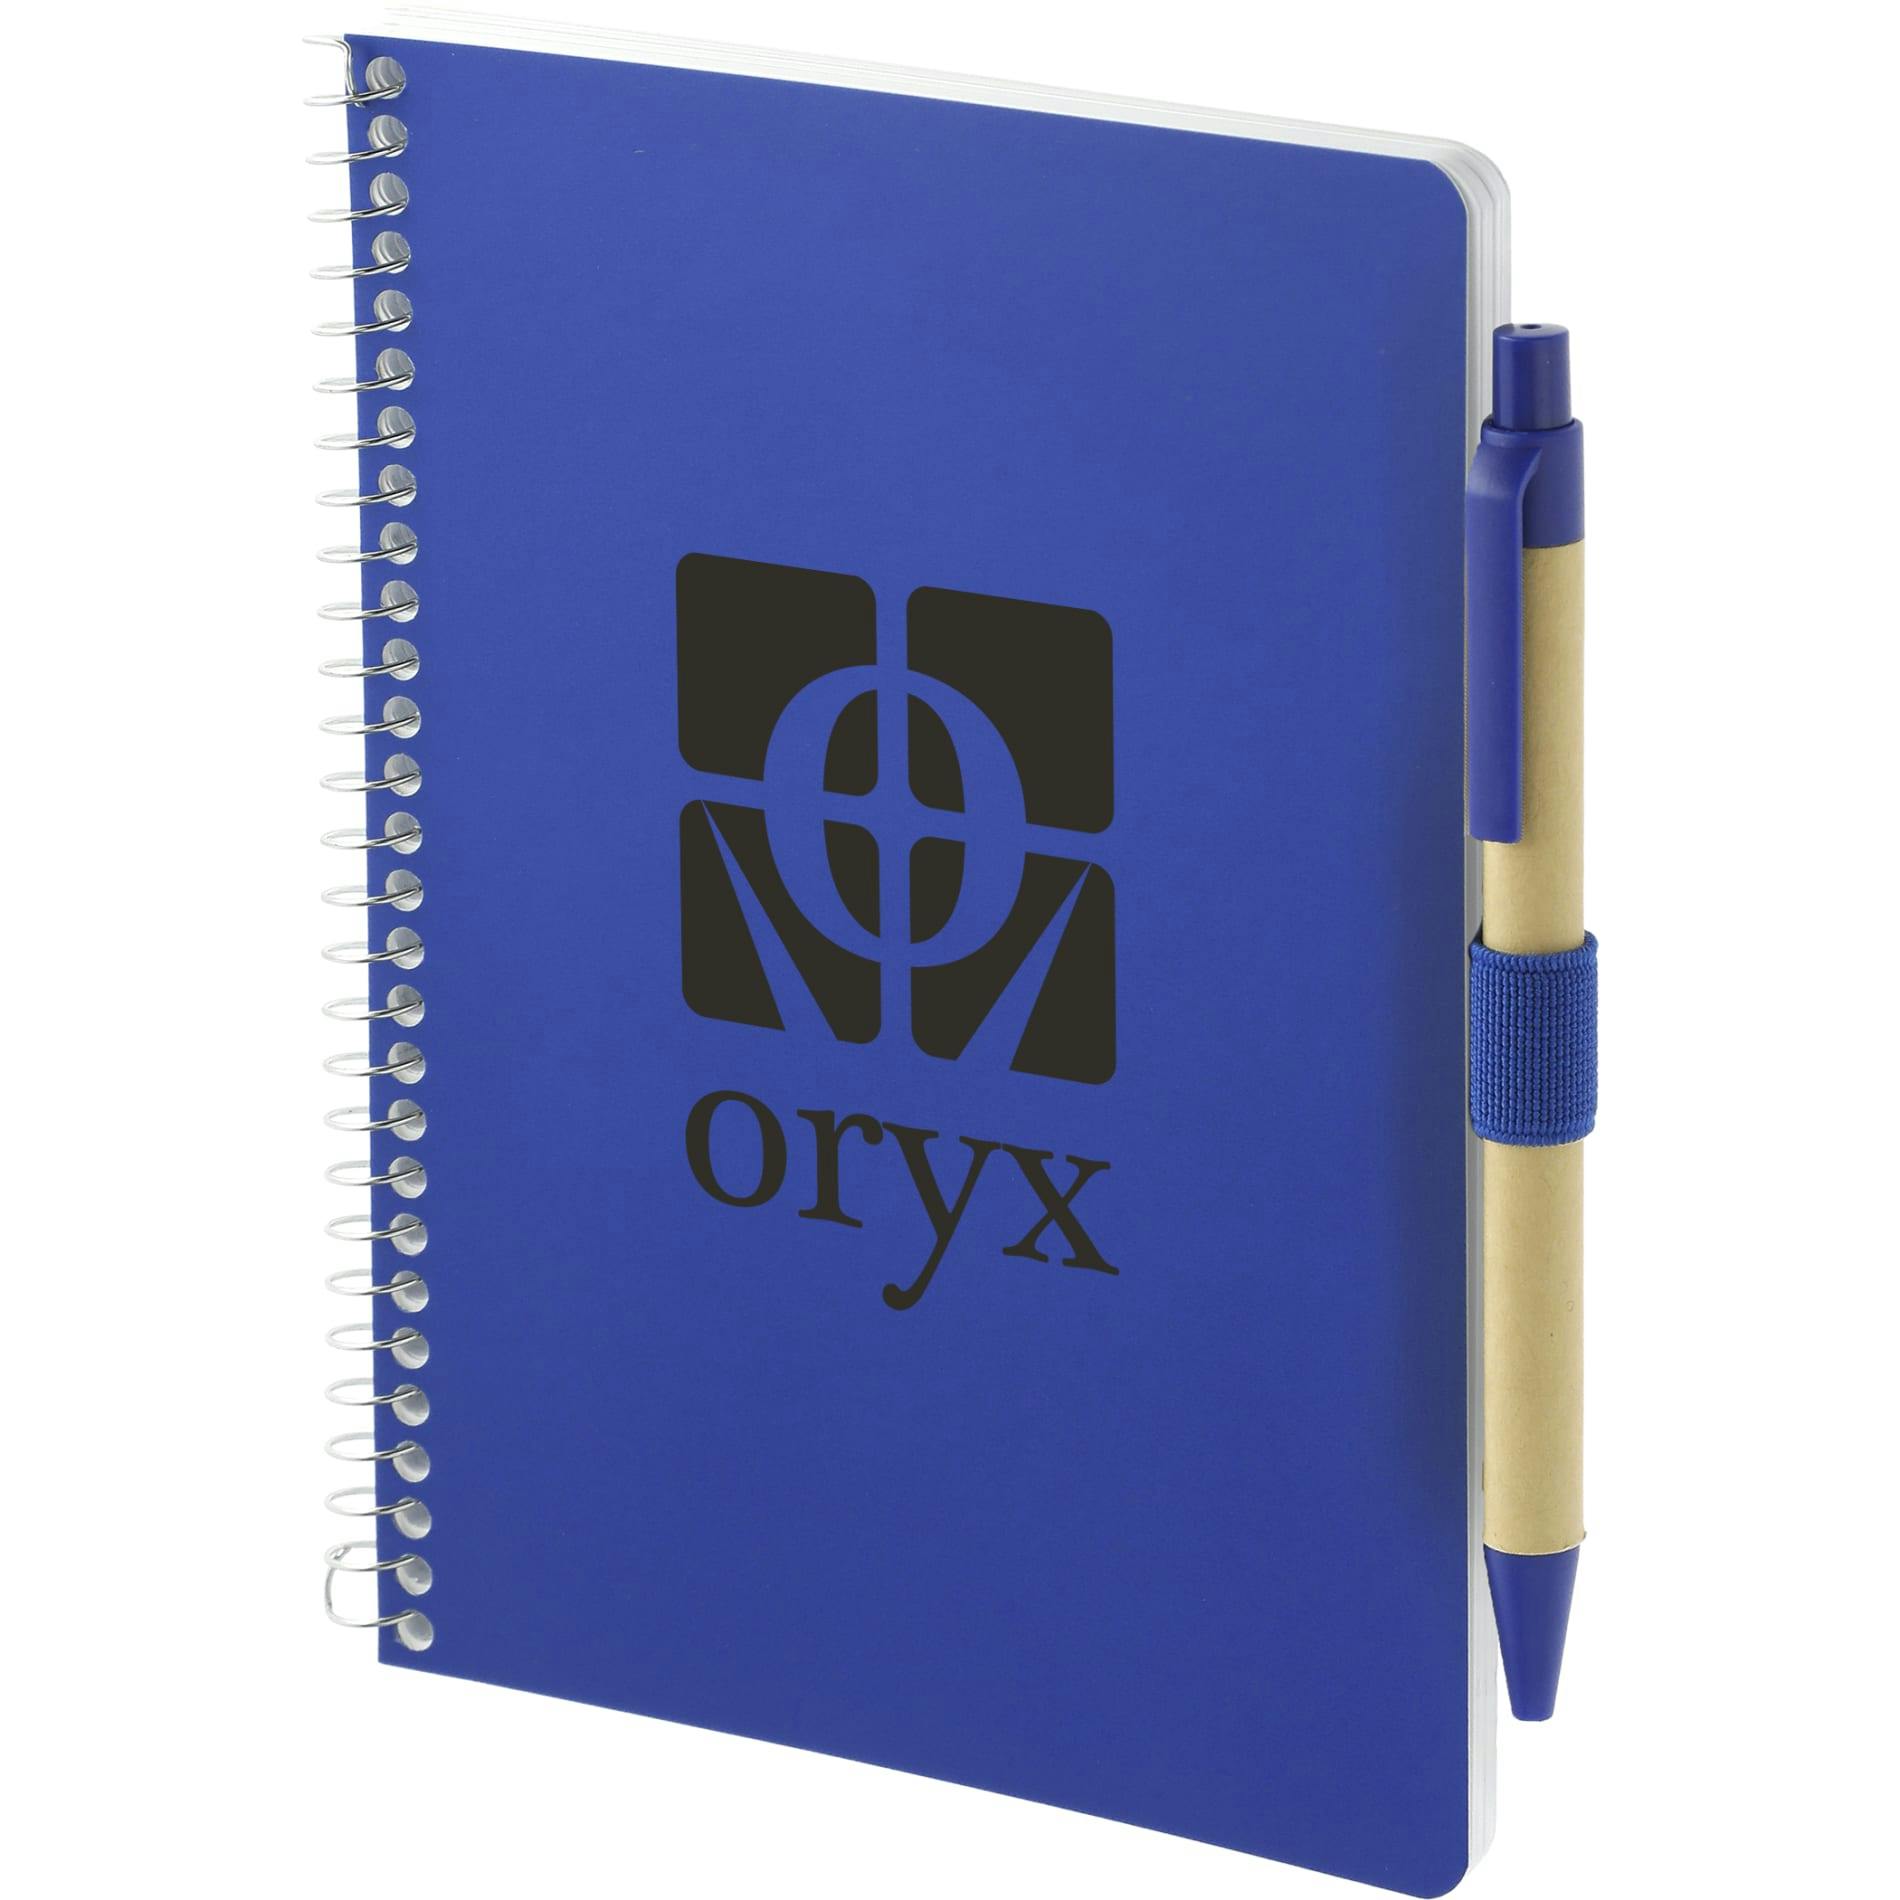 5” x 7” FSC® Mix Spiral Notebook with Pen - additional Image 4